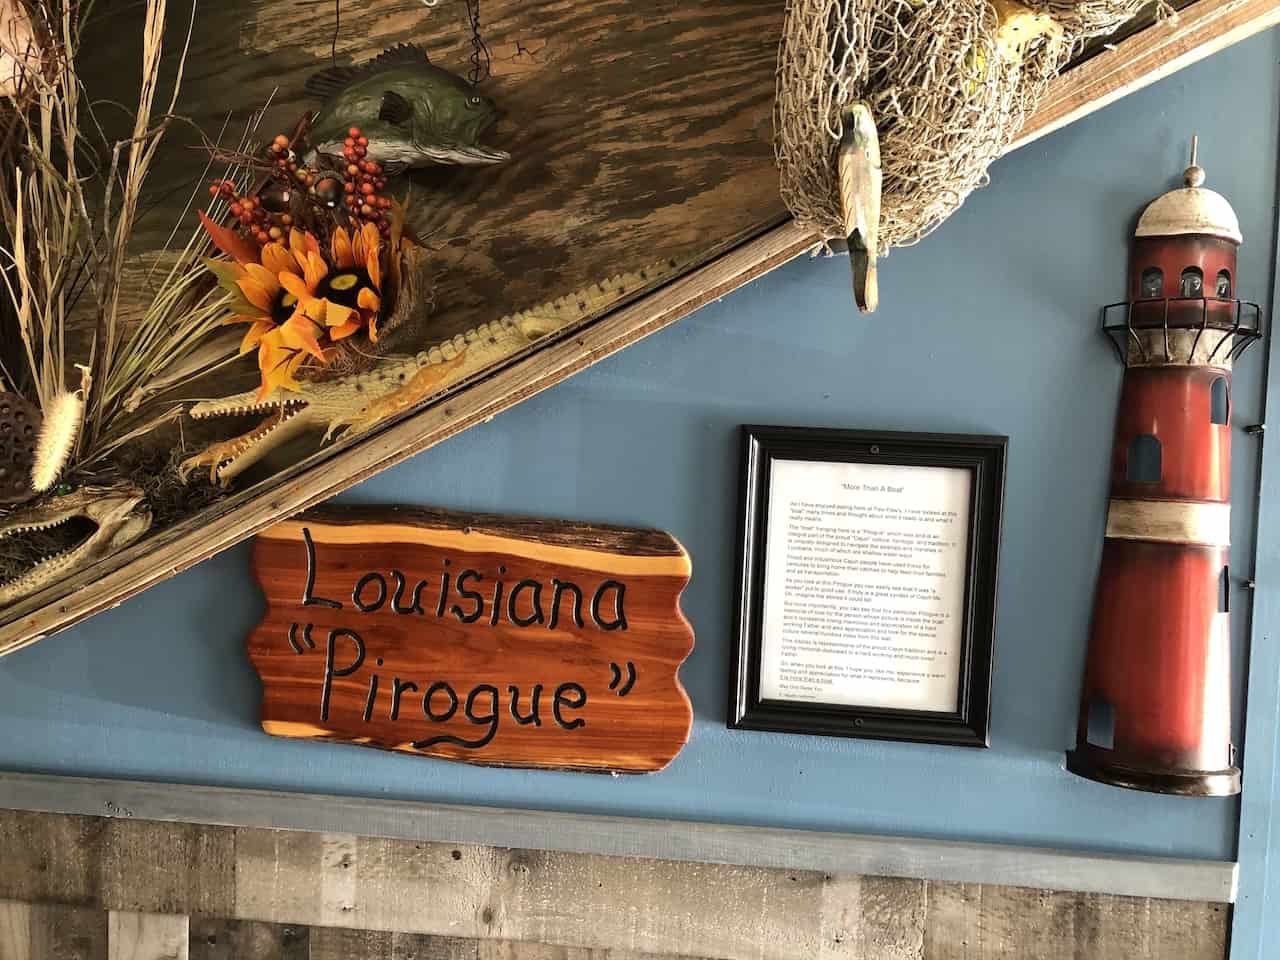 Pirogue on the wall at Paw Paw's